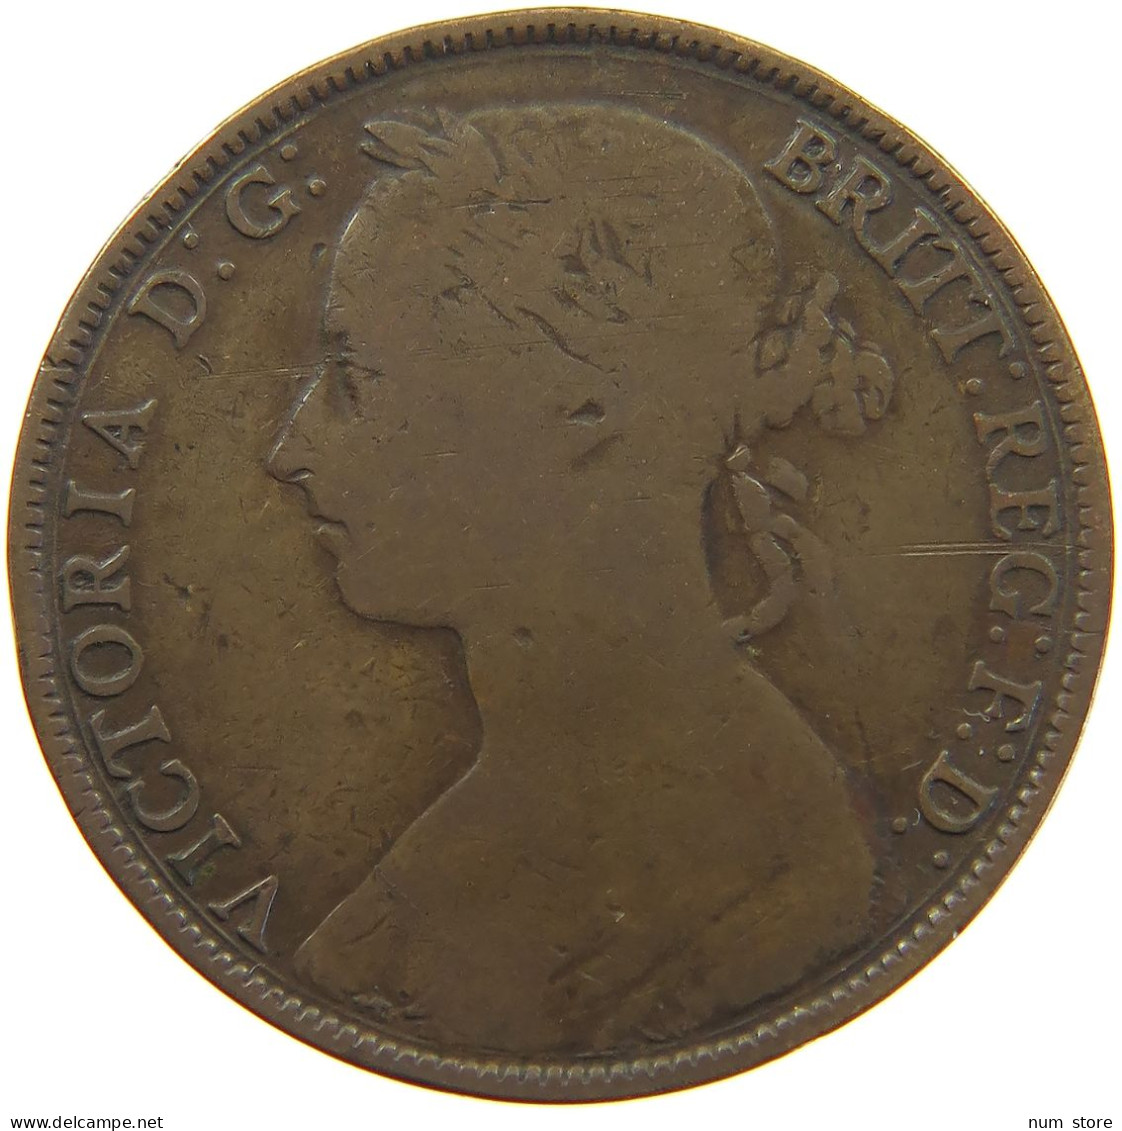 GREAT BRITAIN PENNY 1882 H Victoria 1837-1901 #a050 0595 - D. 1 Penny